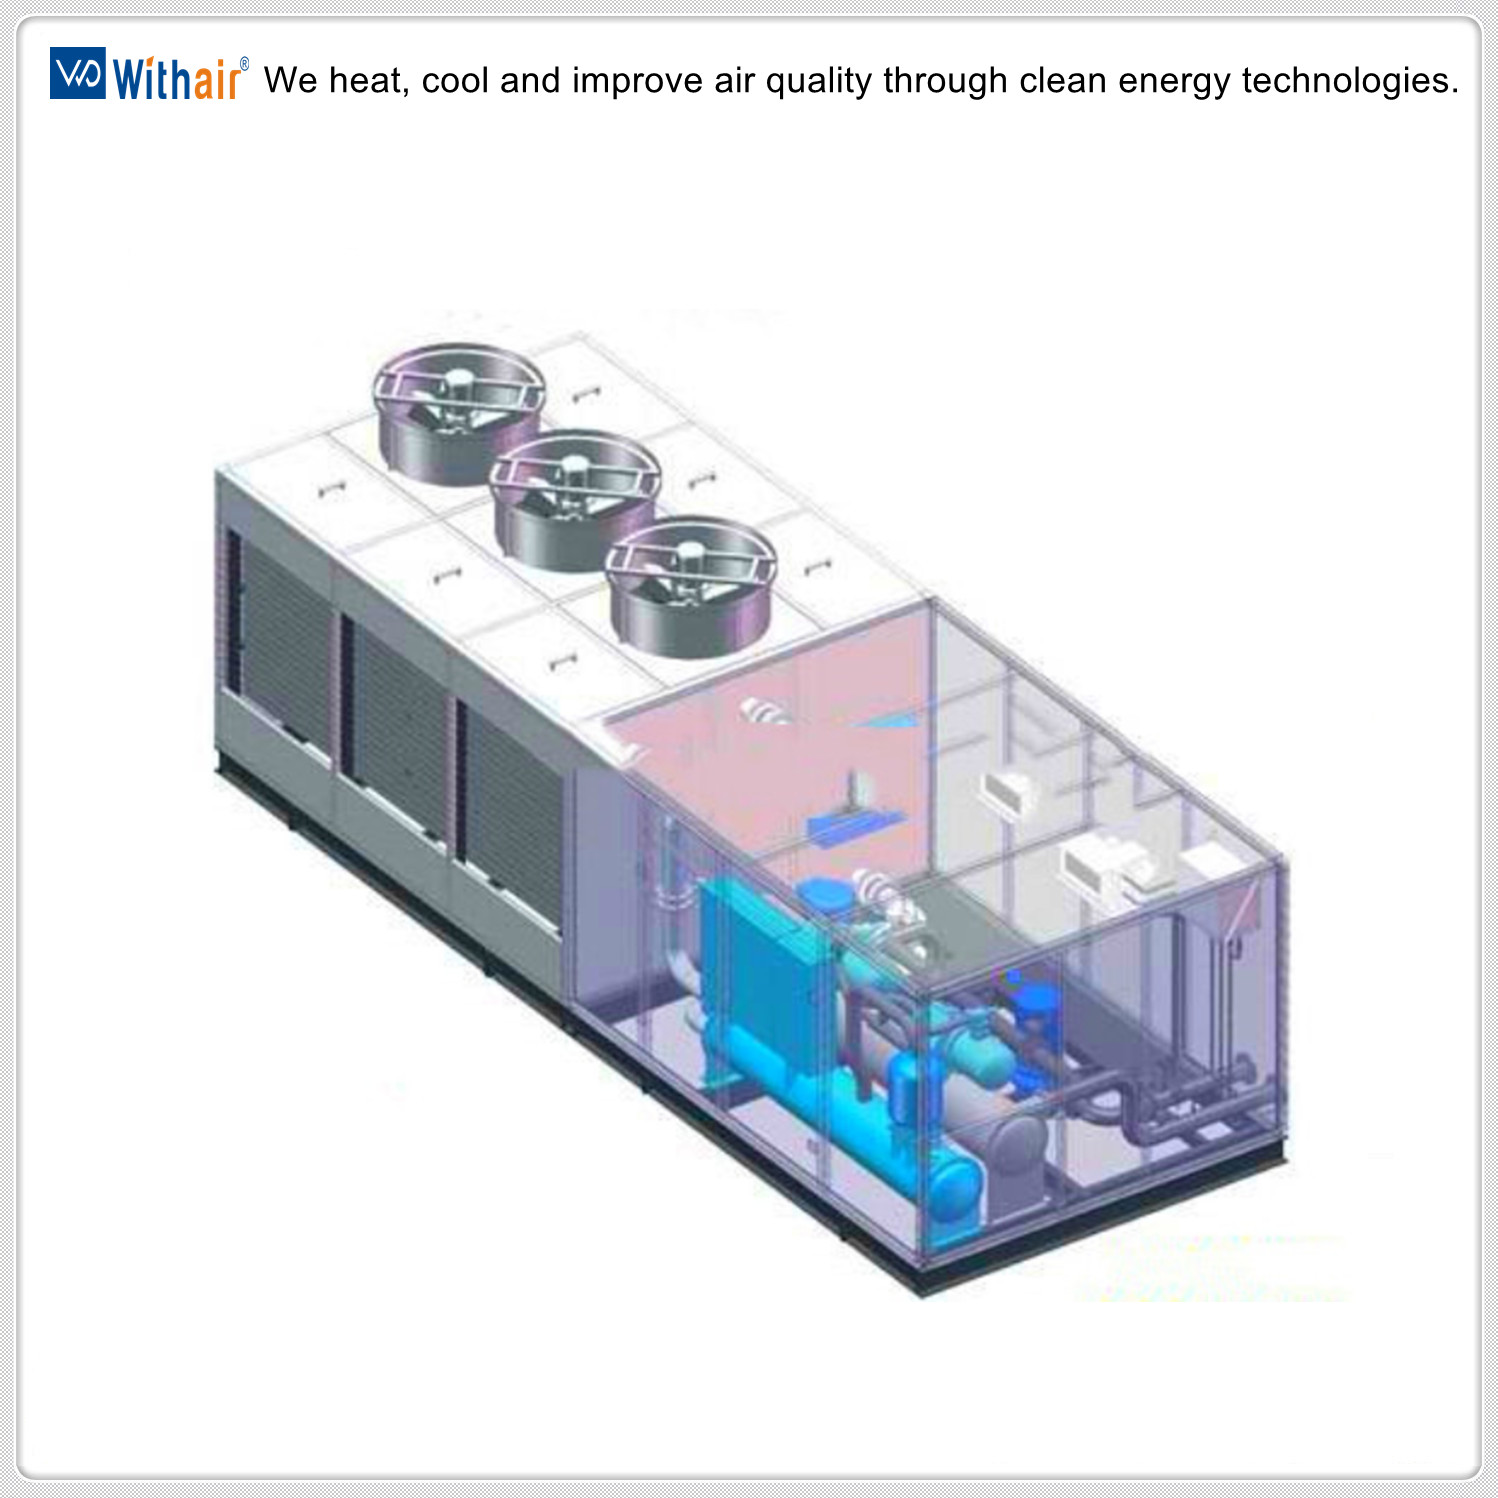 Integrated Evaporative Cooled Chillers